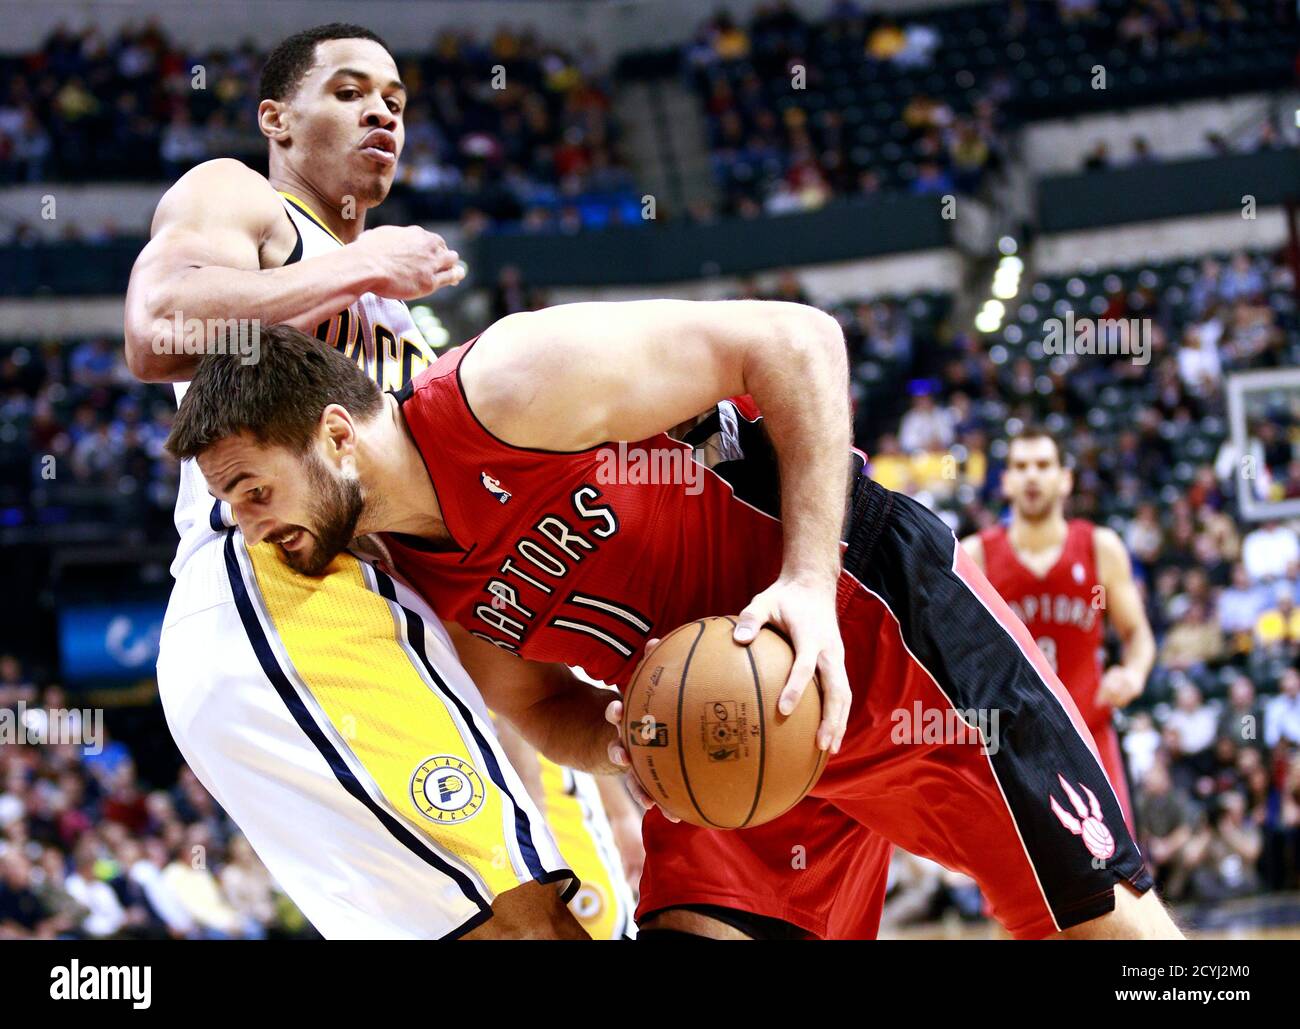 Toronto Raptors forward Linas Kleiza (11) of Lithuania collides with  Indiana Pacers guard Gerald Green during the second quarter of an NBA  basketball game in Indianapolis November 13, 2012. REUTERS/Brent Smith  (UNITED